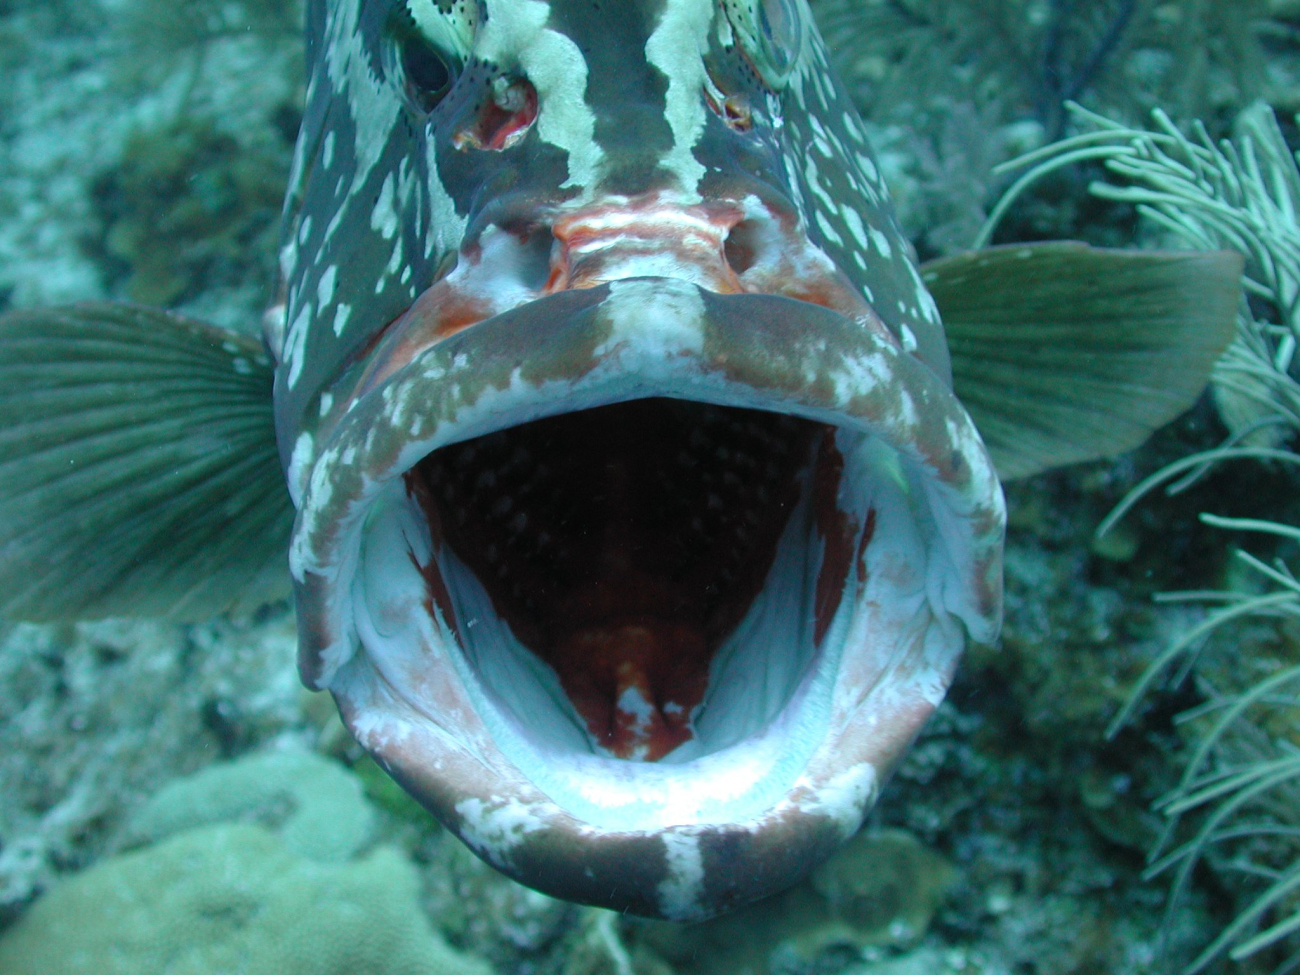 This Nassau grouper, nicknamed Jerry, came to visit on many of our dives